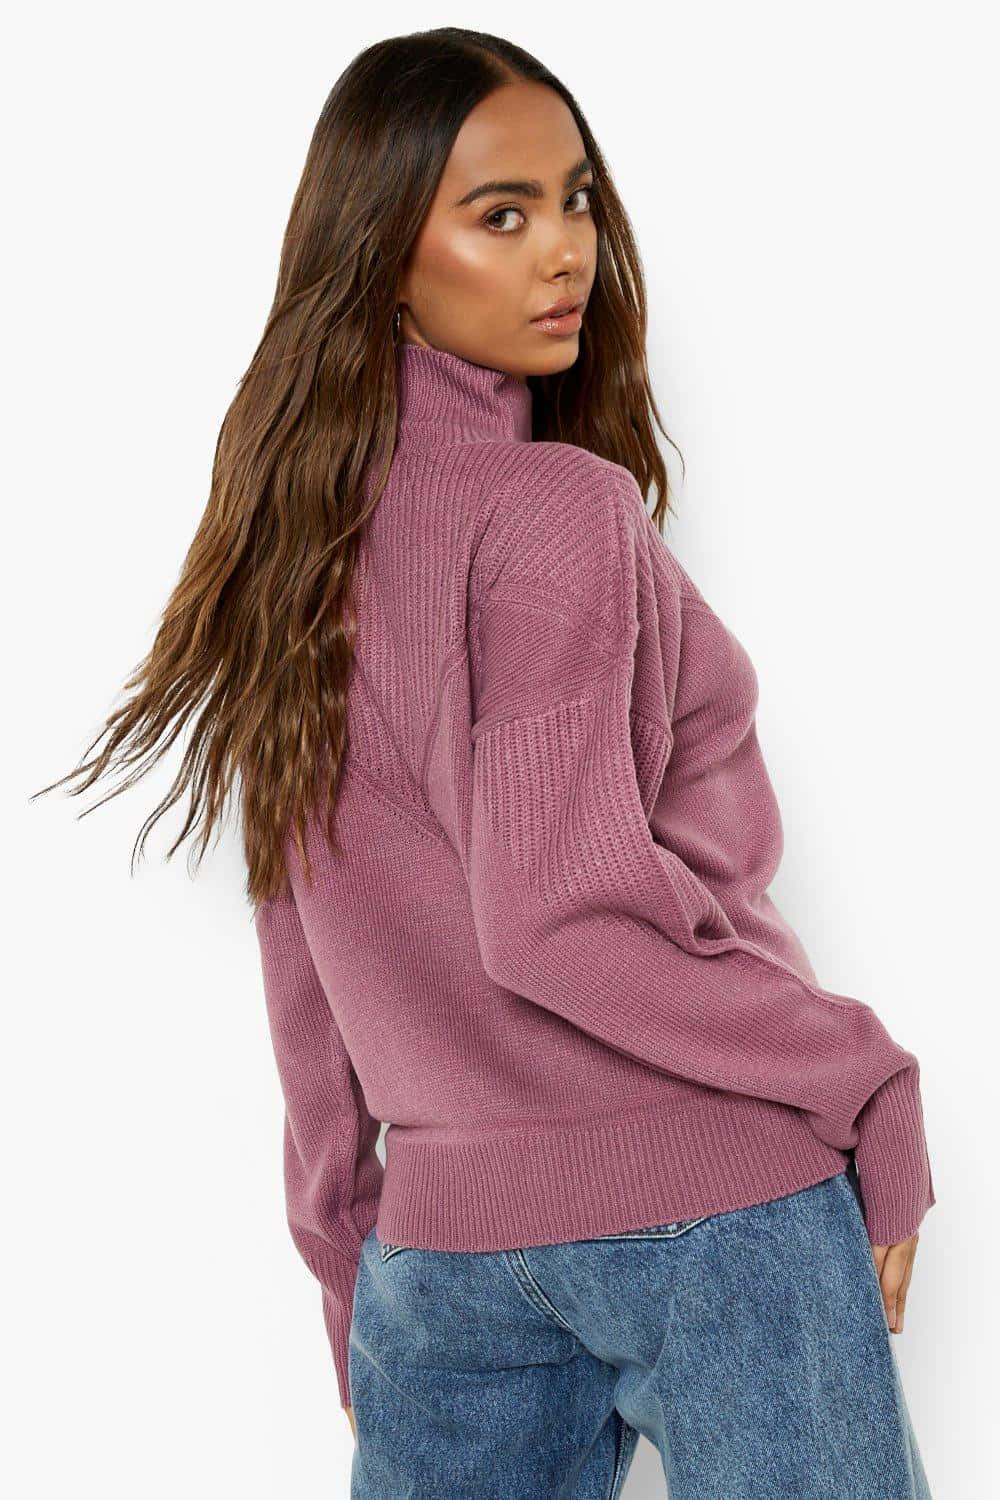 Show off your personal style with a vibrant purple turtleneck sweater Wallpaper